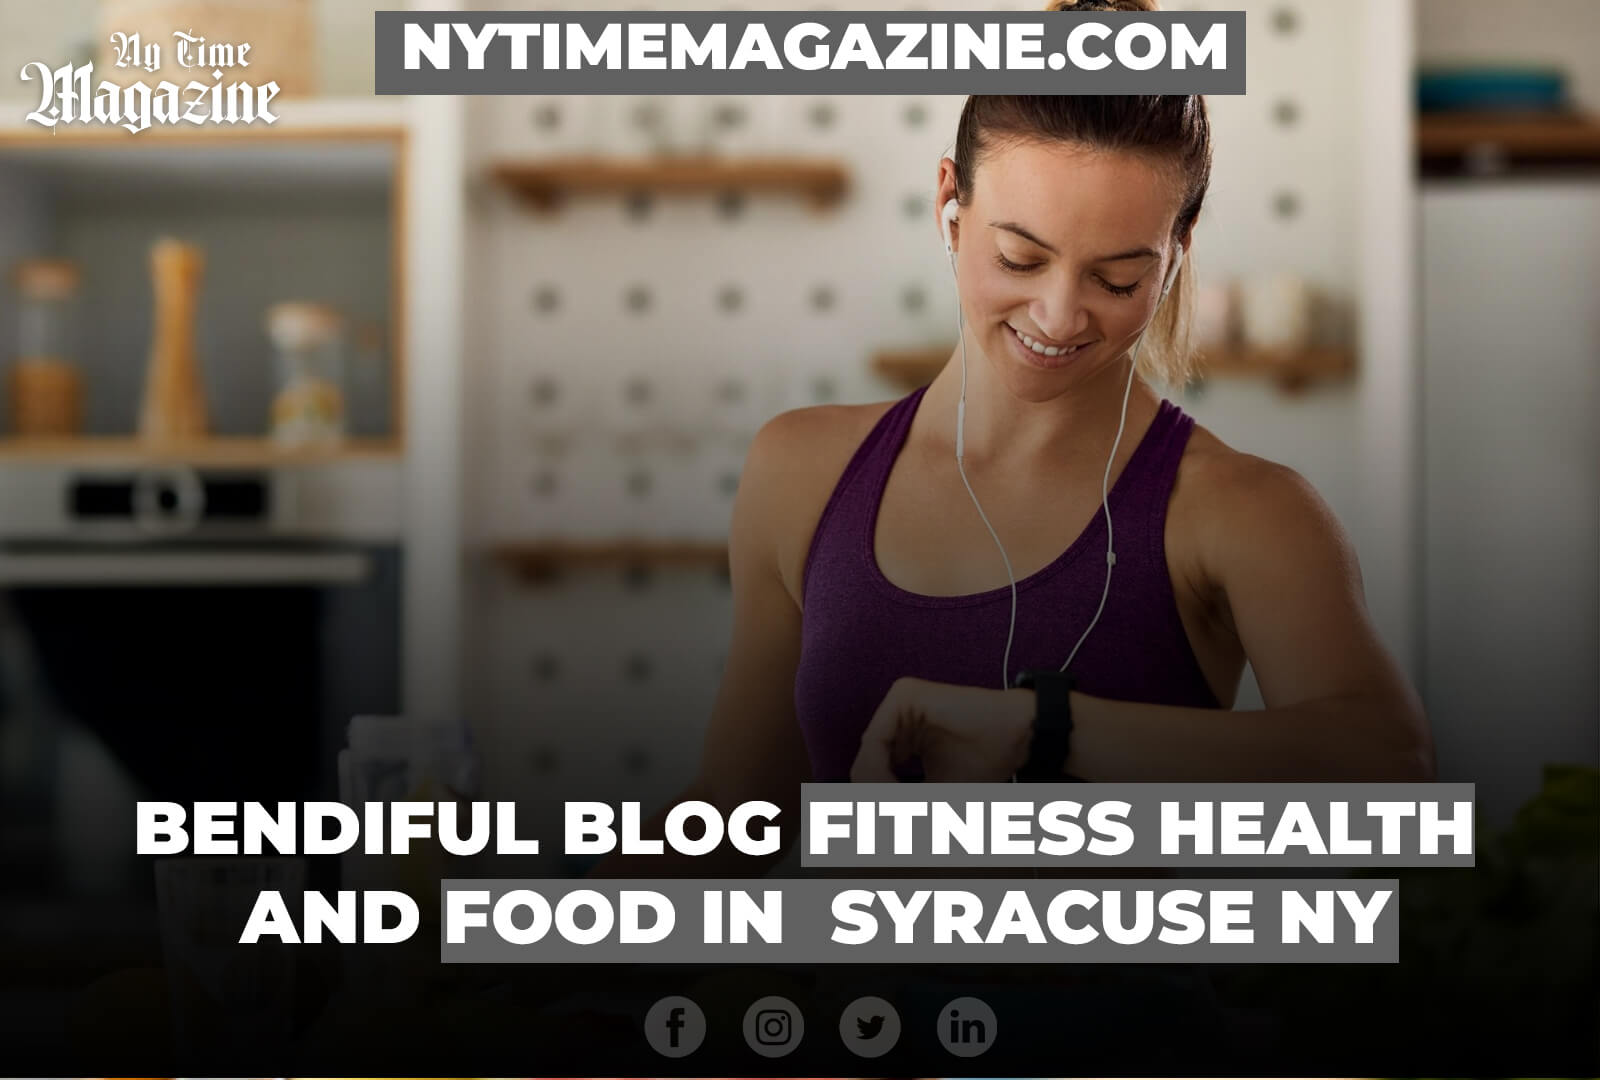 Bendiful blog fitness health and food in Syracuse NY